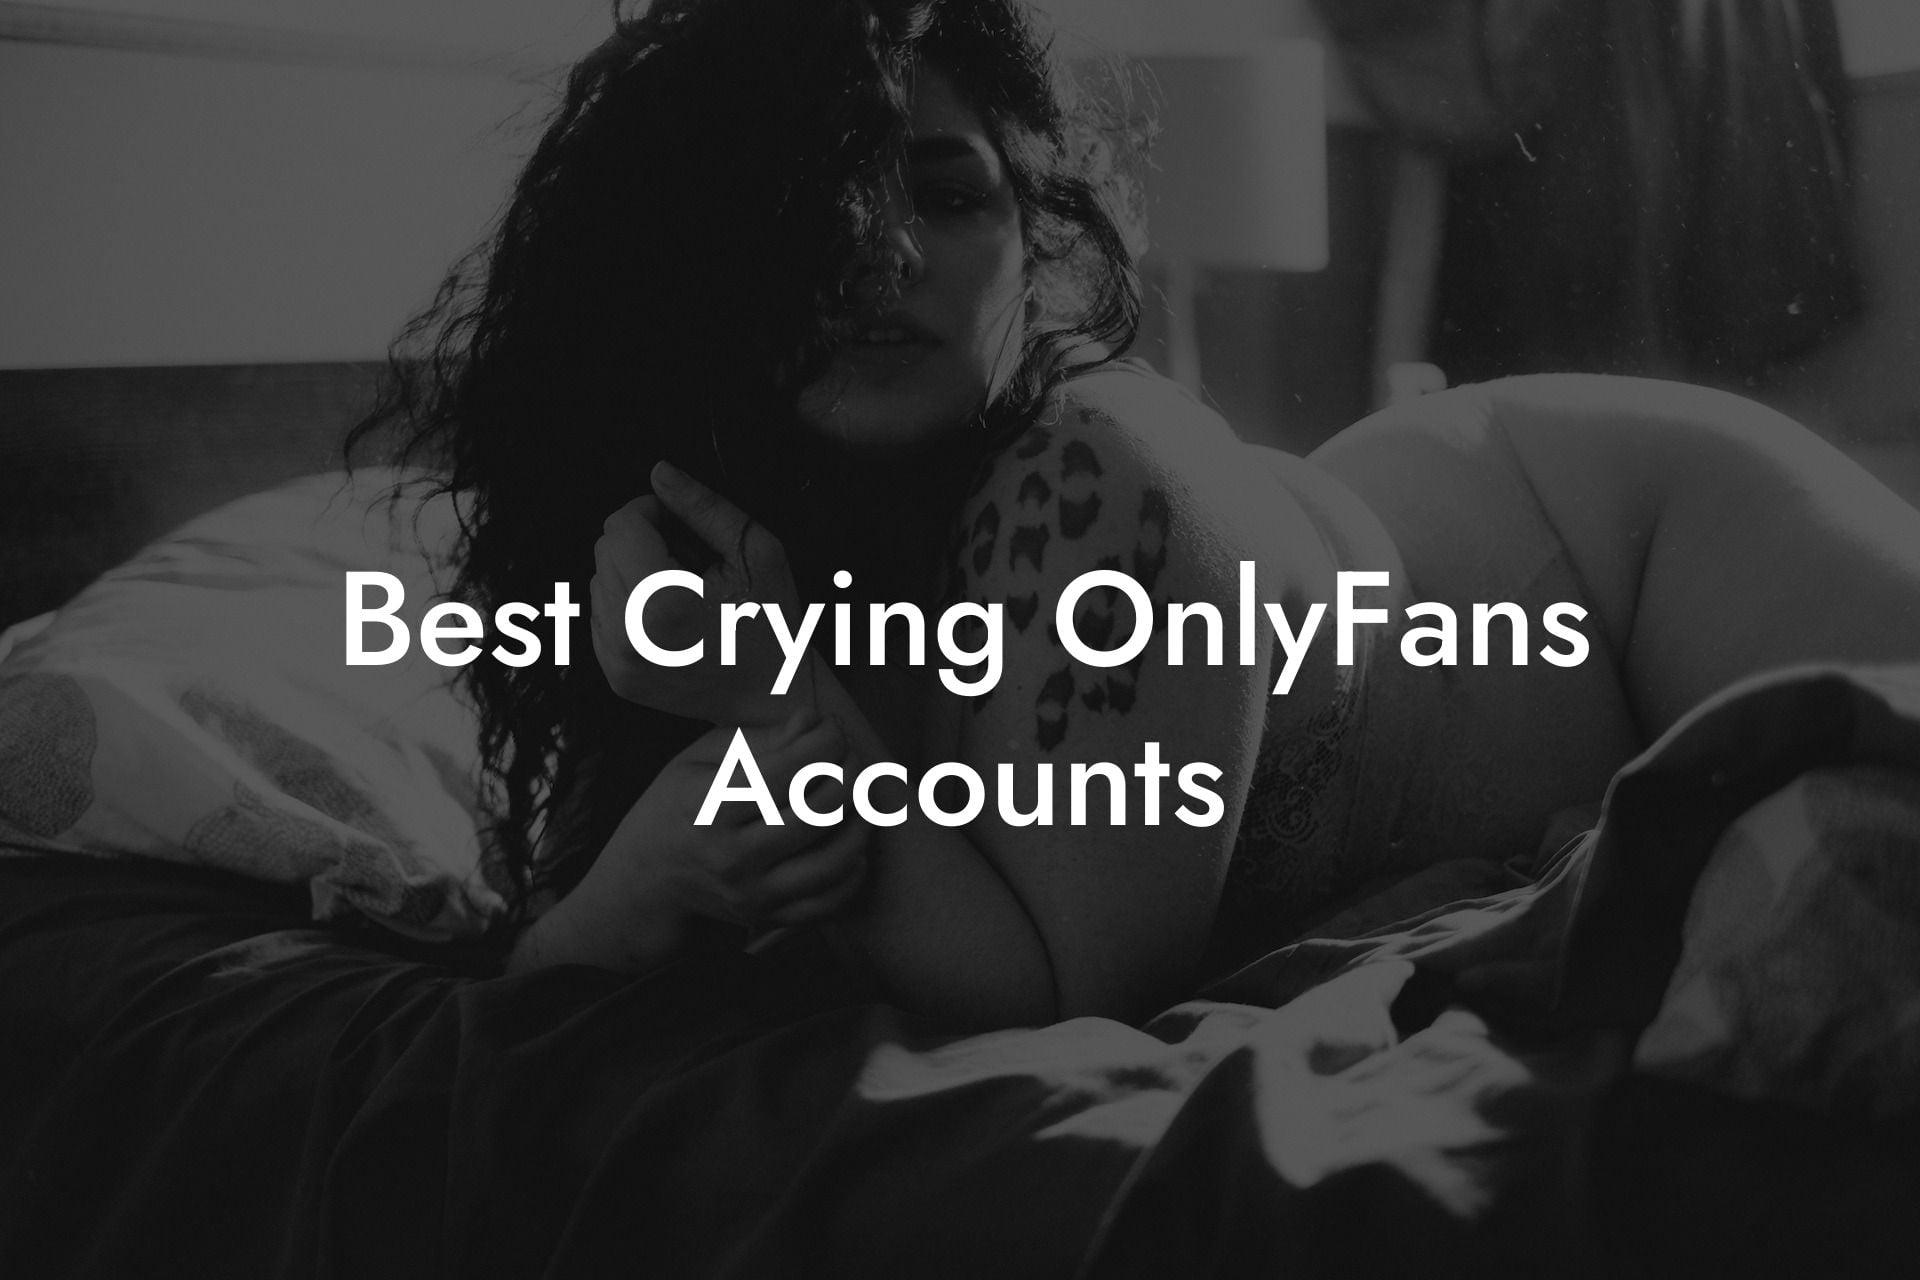 Best Crying OnlyFans Accounts